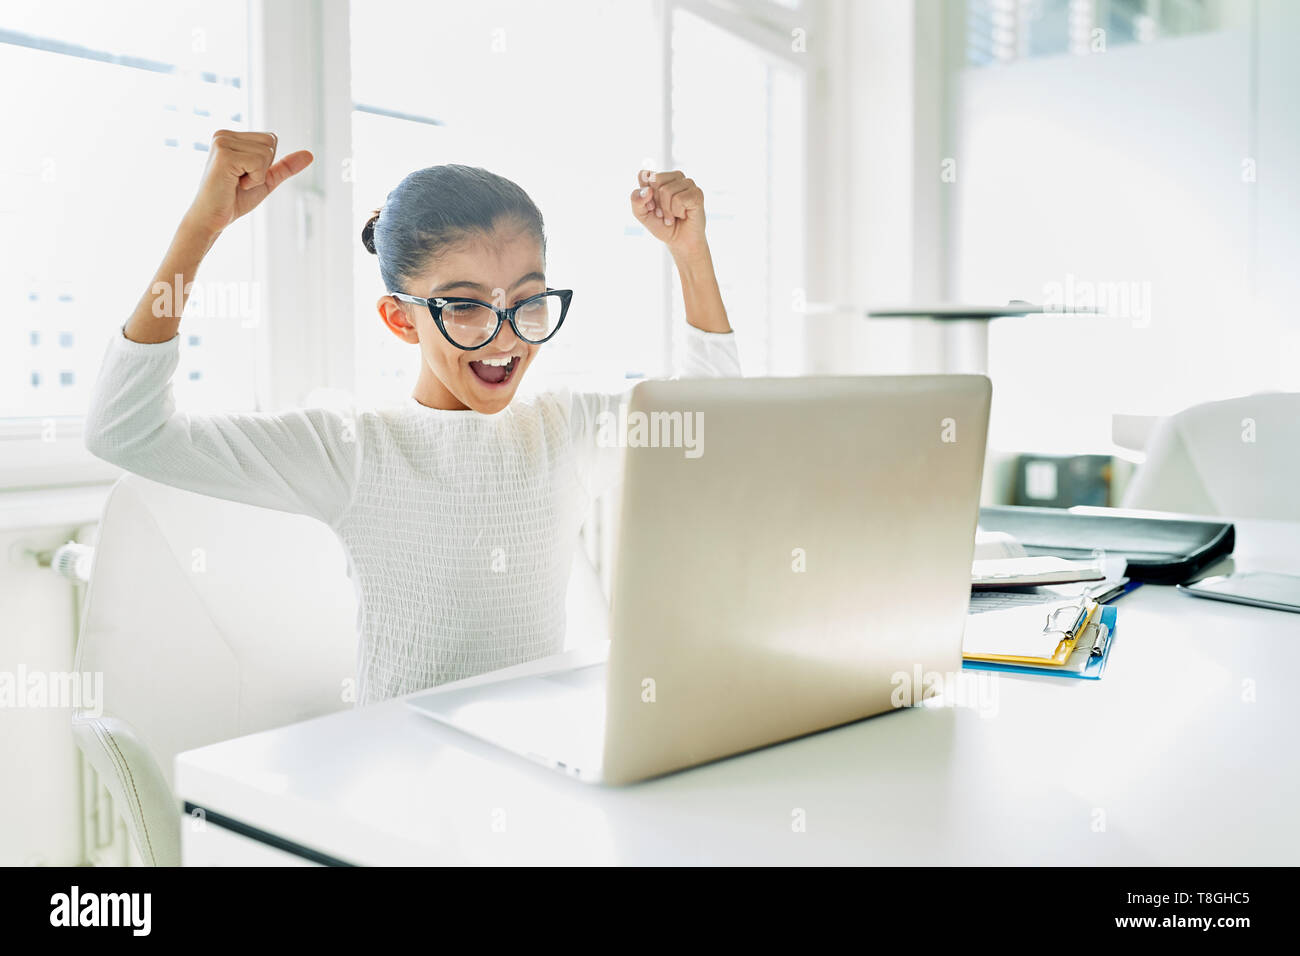 Girl as Business Woman on Laptop Computer celebrates a success Stock Photo